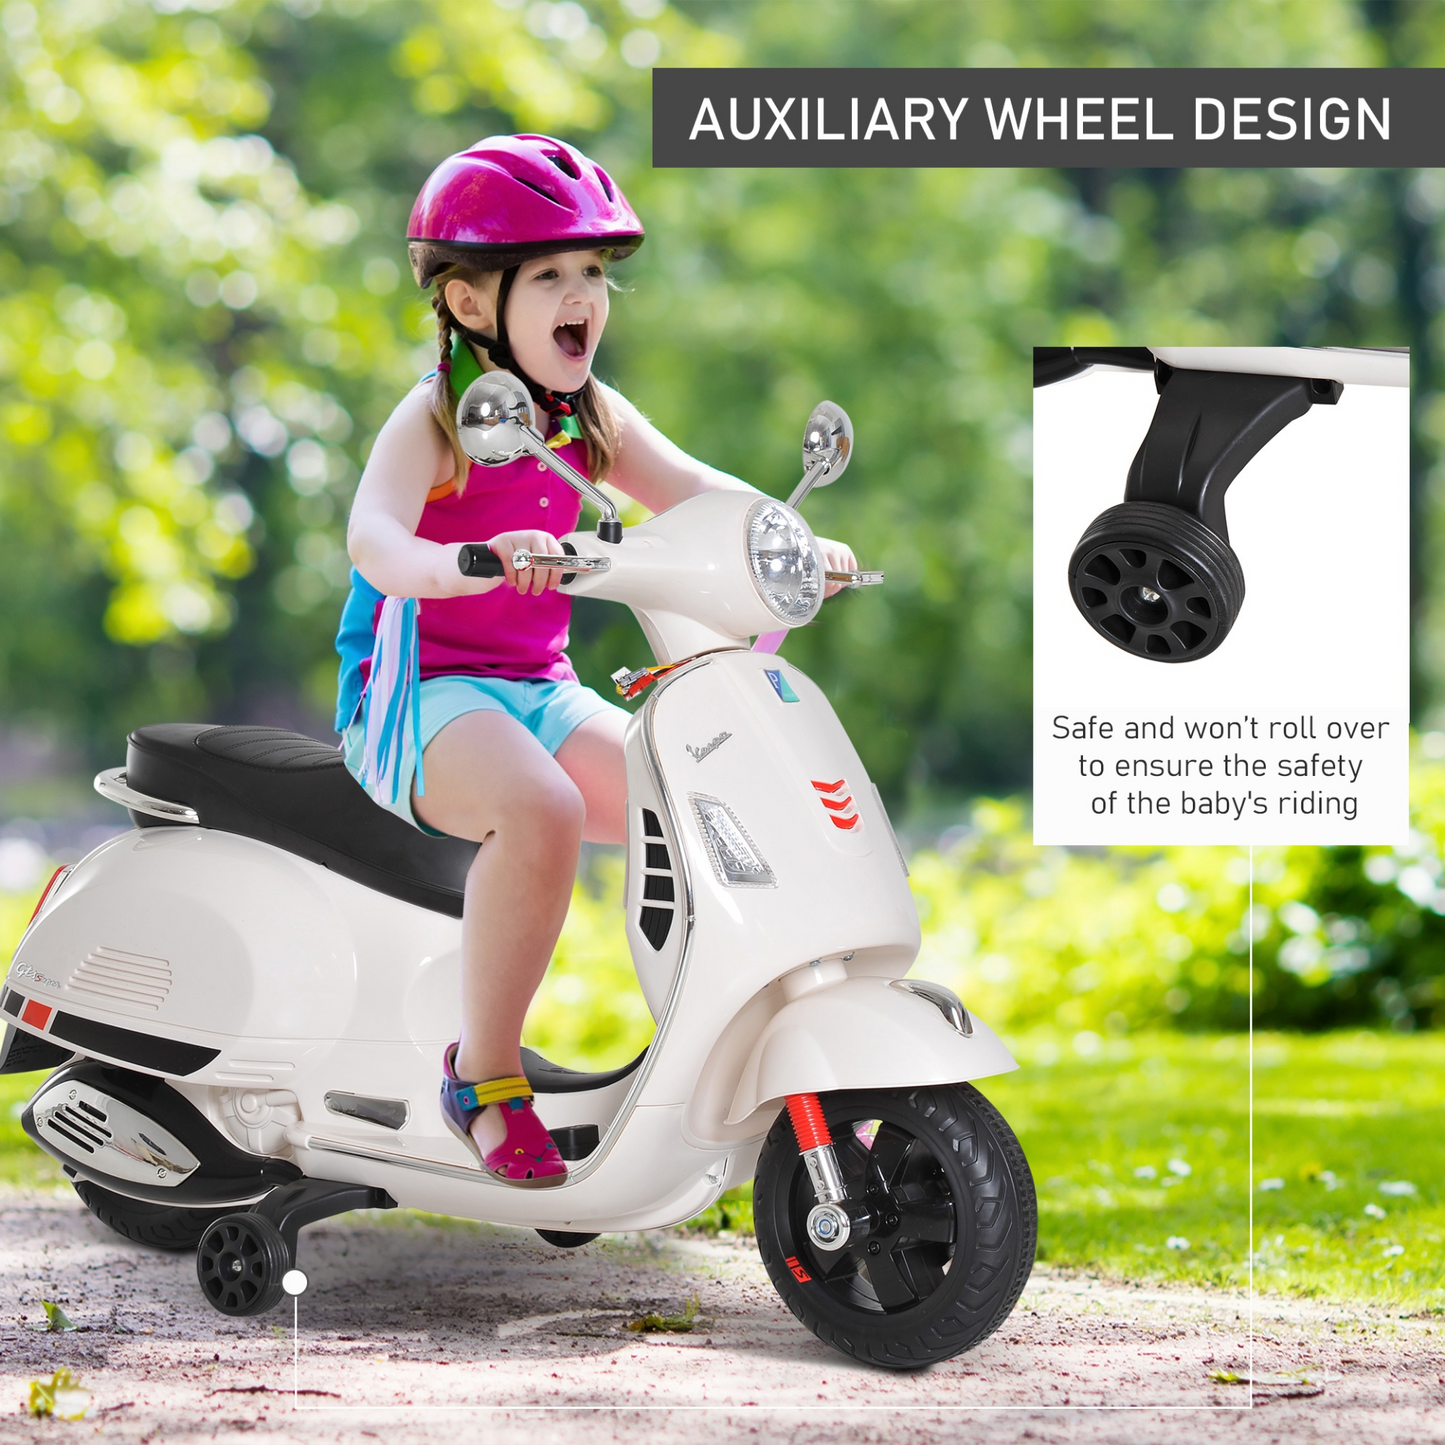 HOMCOM 6V Kids Electric Motorcycle Licensed Vespa Ride On Motorbike w/ MP3 Music LED Toy for 3-6 Years Old White